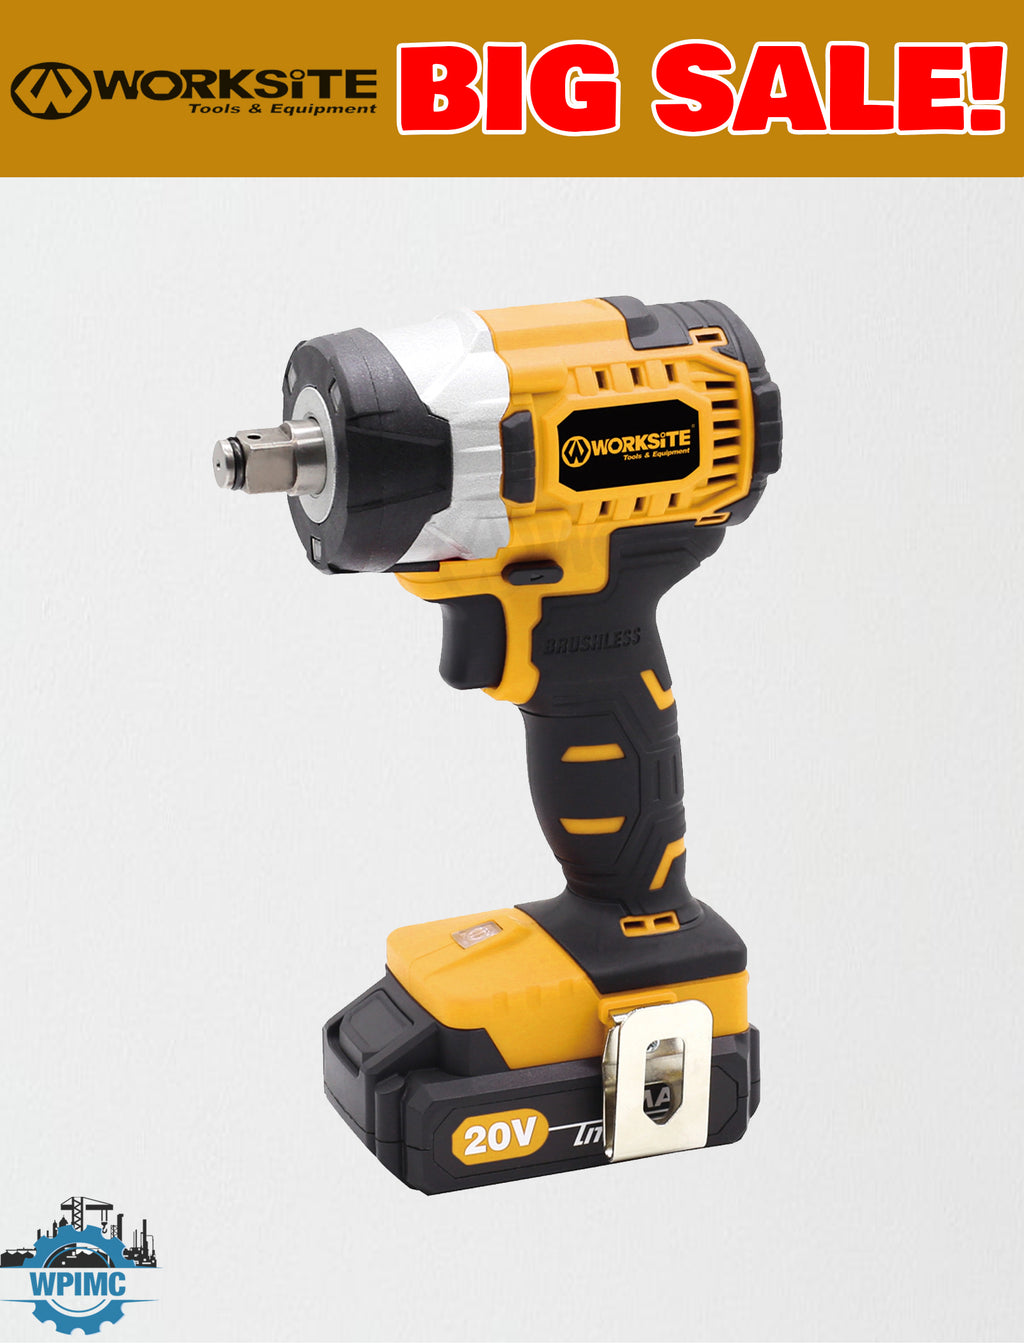 WORKSITE BRUSHLESS CORDLESS IMPACT DRIVER CIS320A